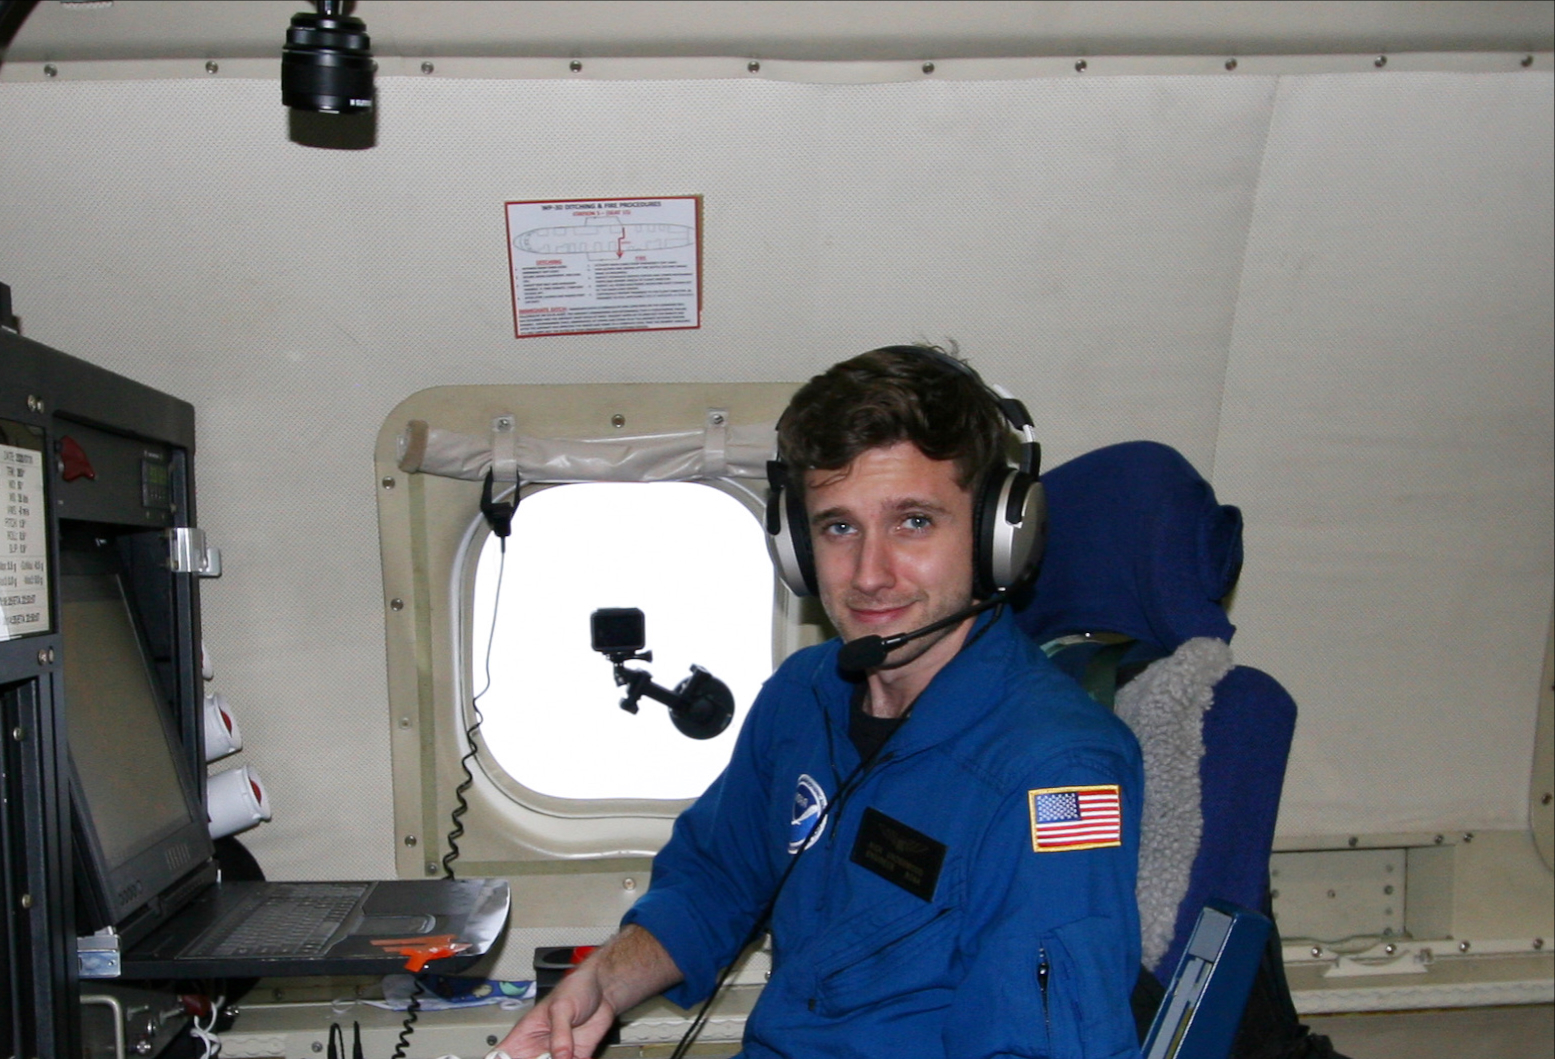 Nick Underwood aboard a NOAA Hurricane Hunters’s aircraft during Hurricane Laura in 2020. Hurricane Hunters penetrate storms to gather real-time data that informs forecasting. Credit: Mike Mascaro/NOAA